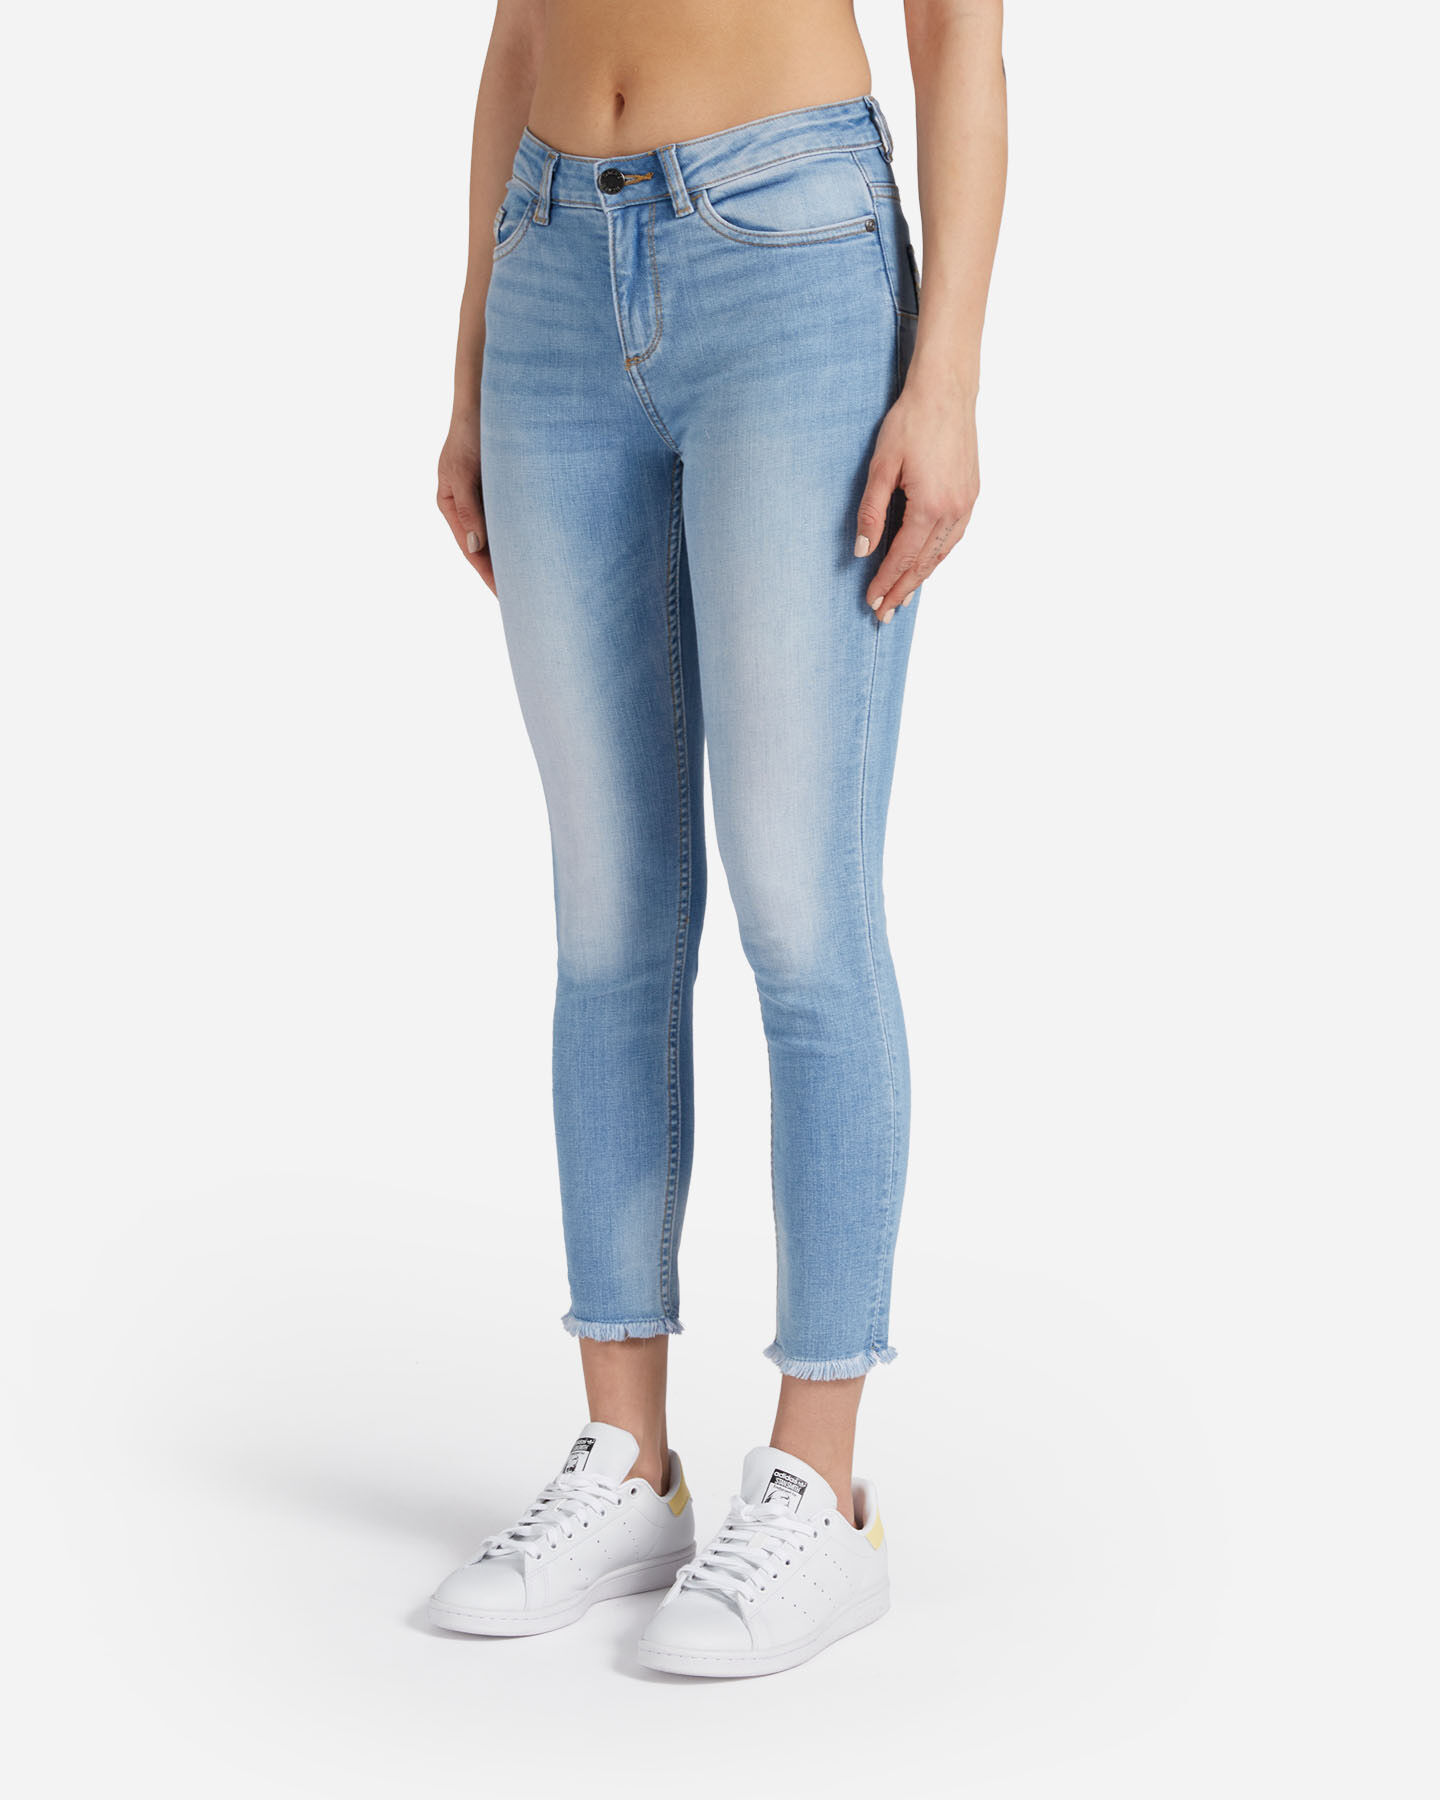  Jeans DACK'S ESSENTIAL W S4129824|LD|40 scatto 2